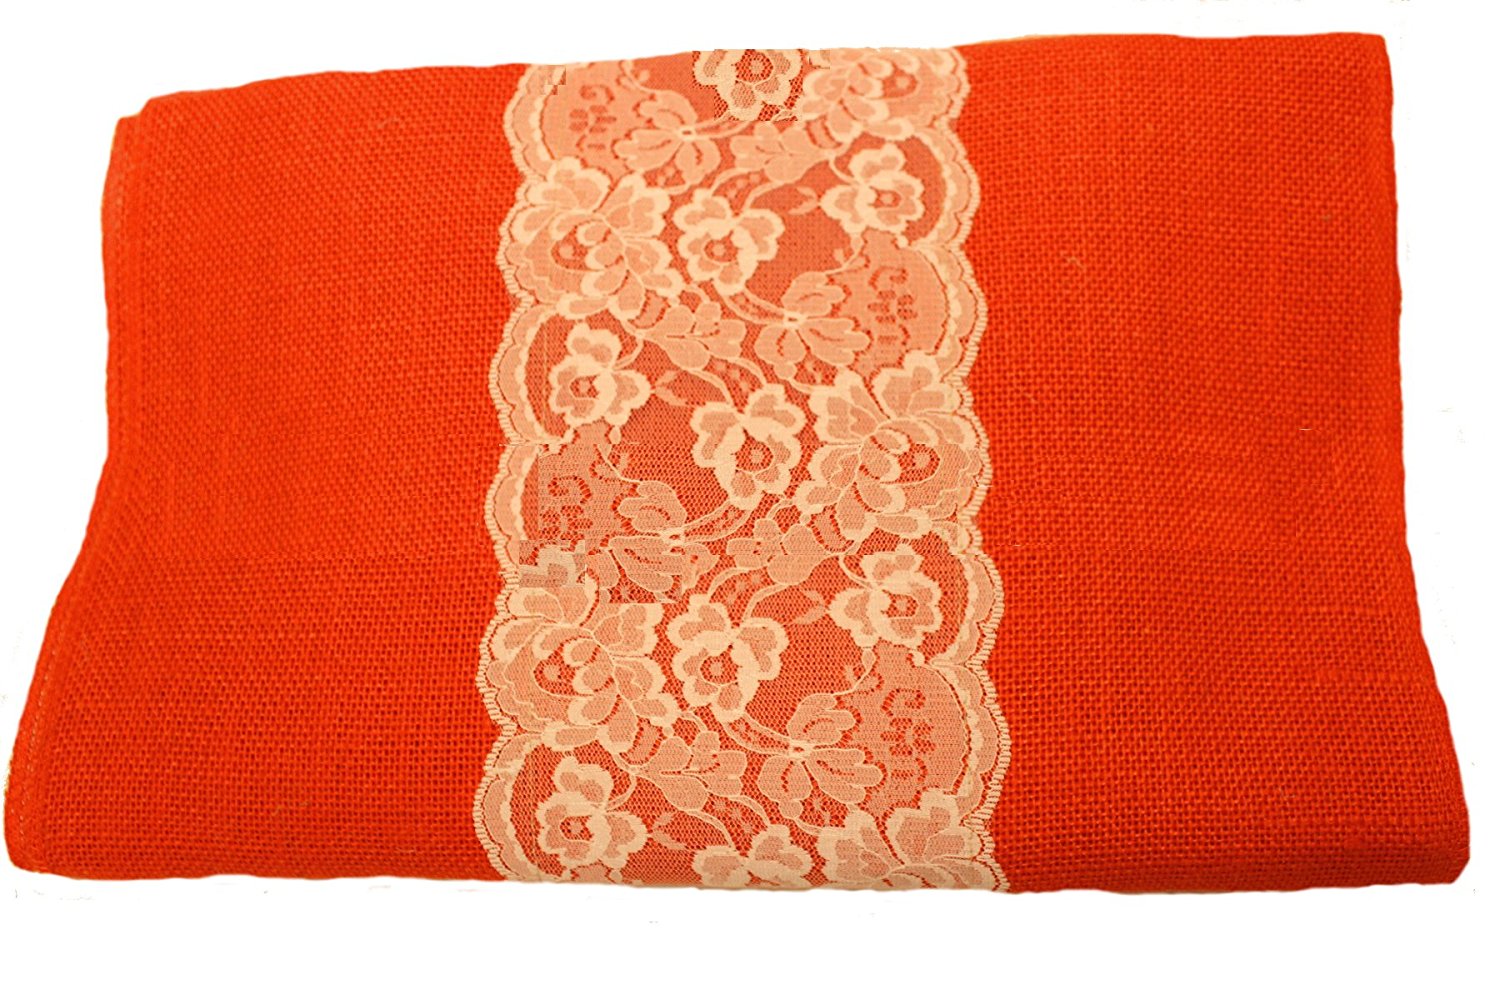 14" Tangerine Burlap Runner with 6" Ivory Lace